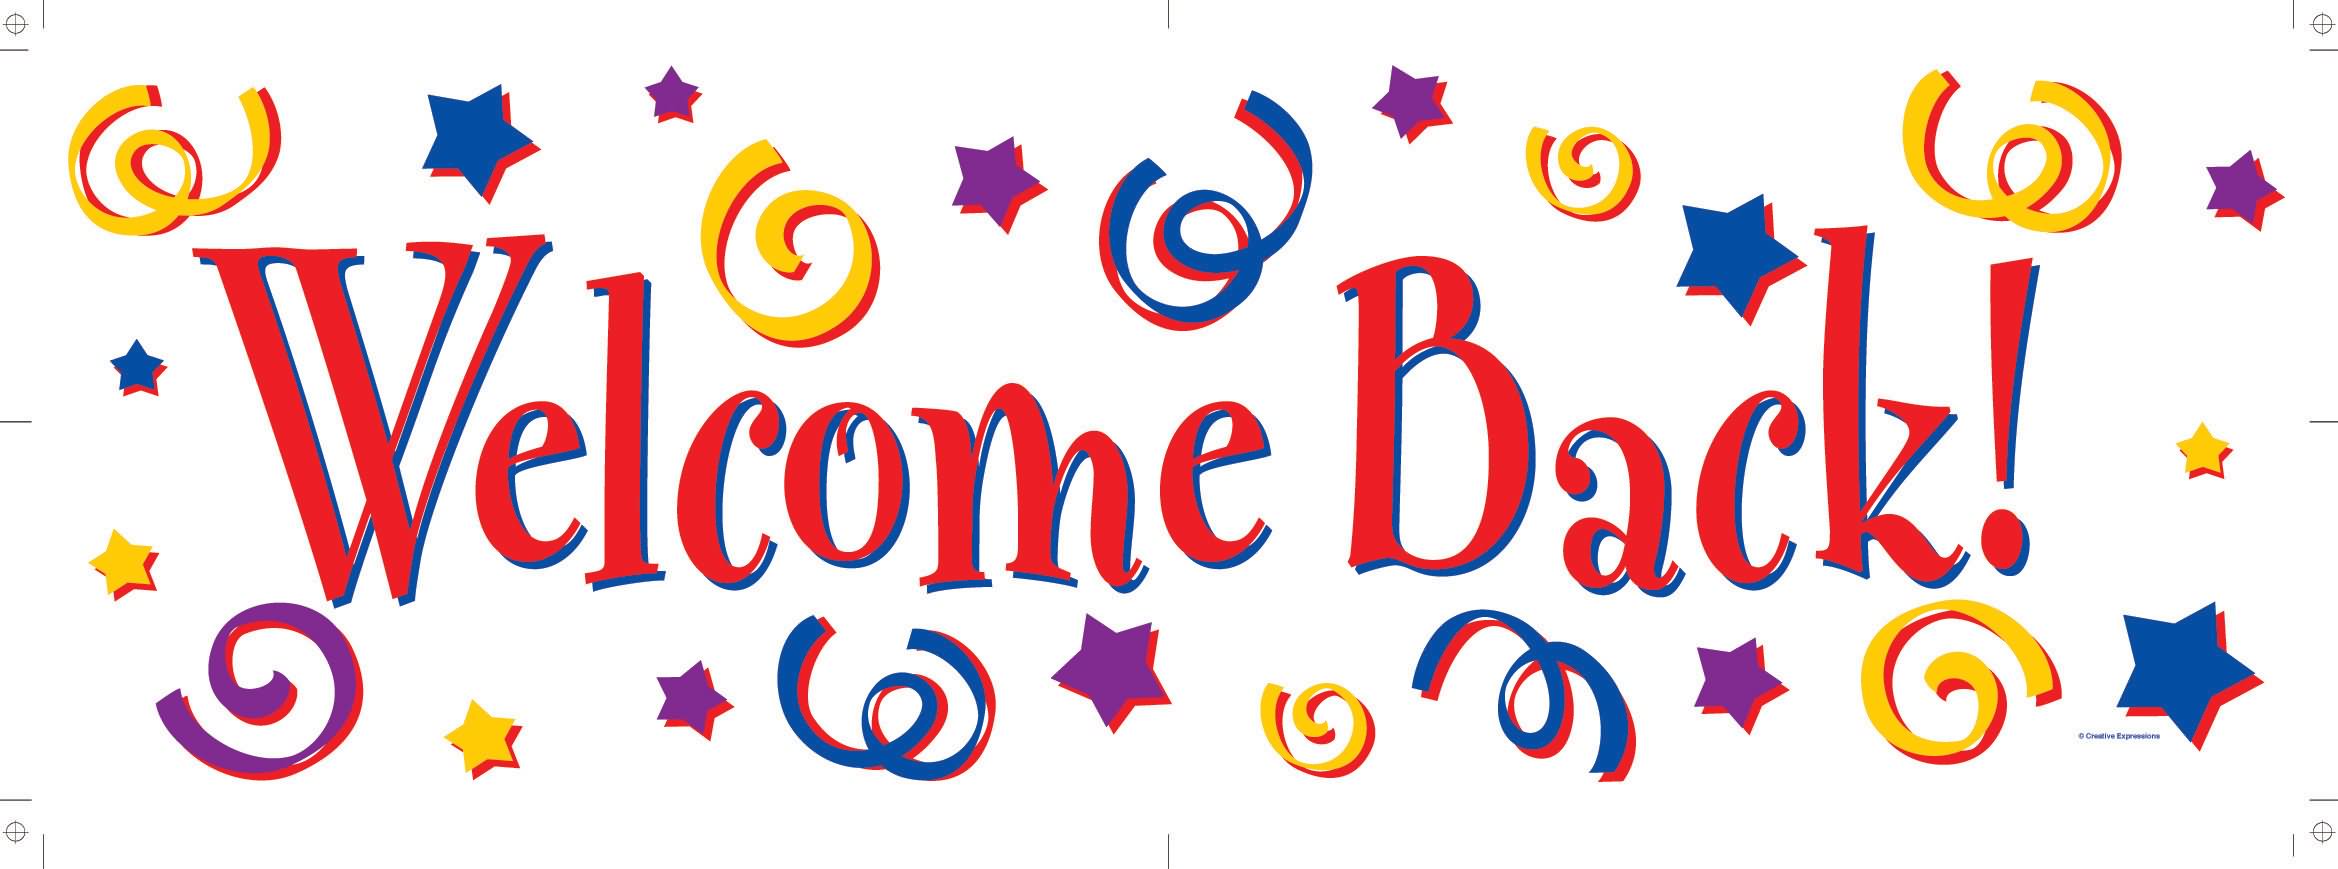 Welcome to our church clipart - Clip Art Welcome